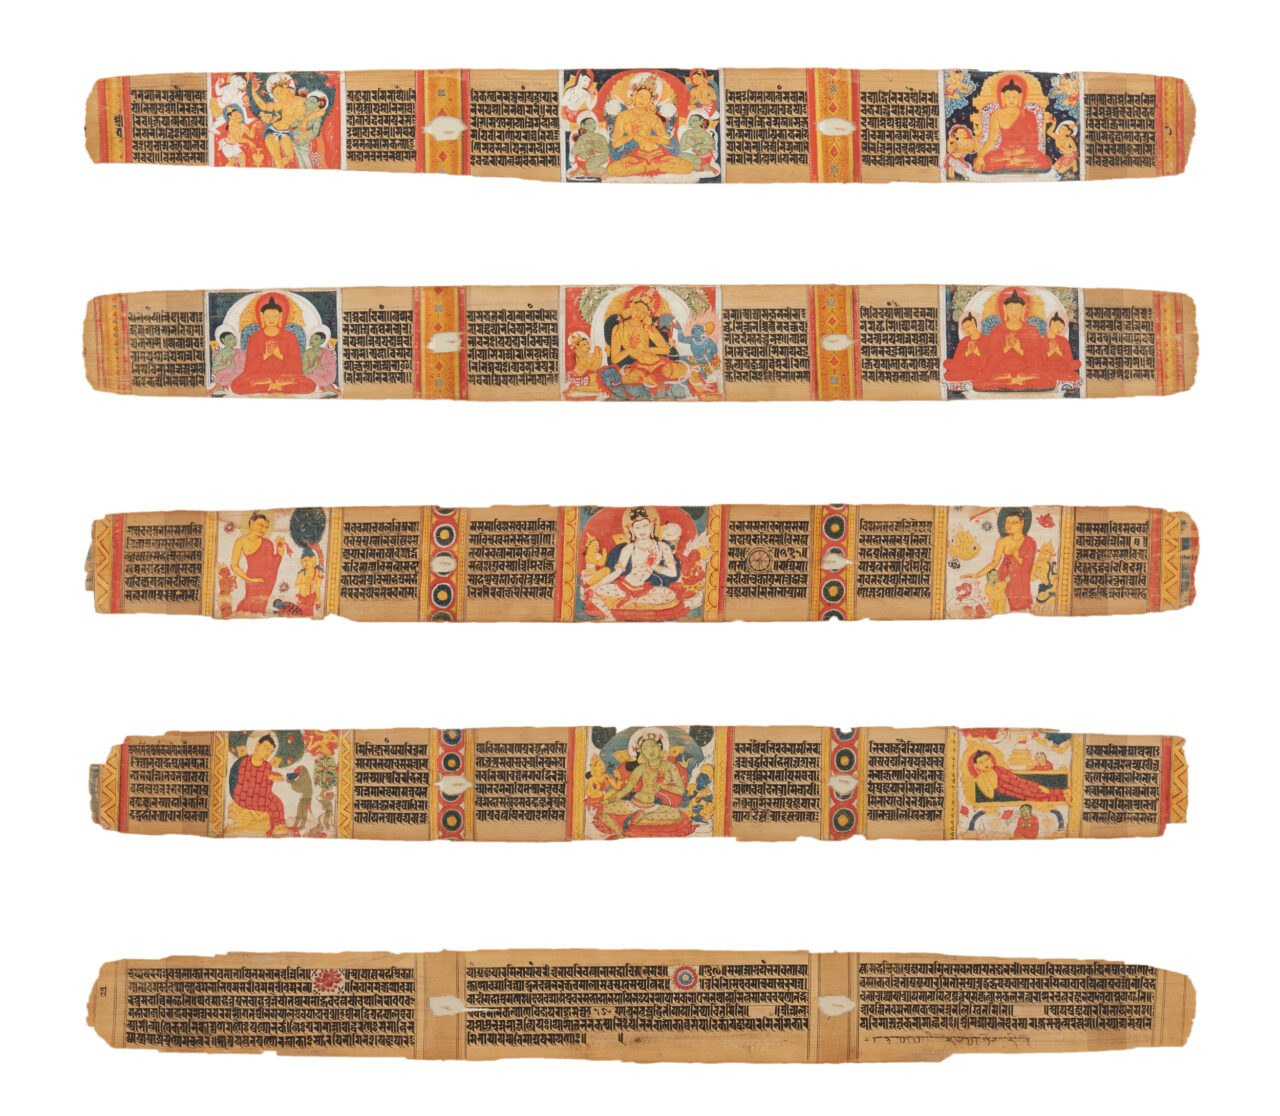 Five thin rectangular pages arranged in column; each page features text interspersed with miniature paintings of deities